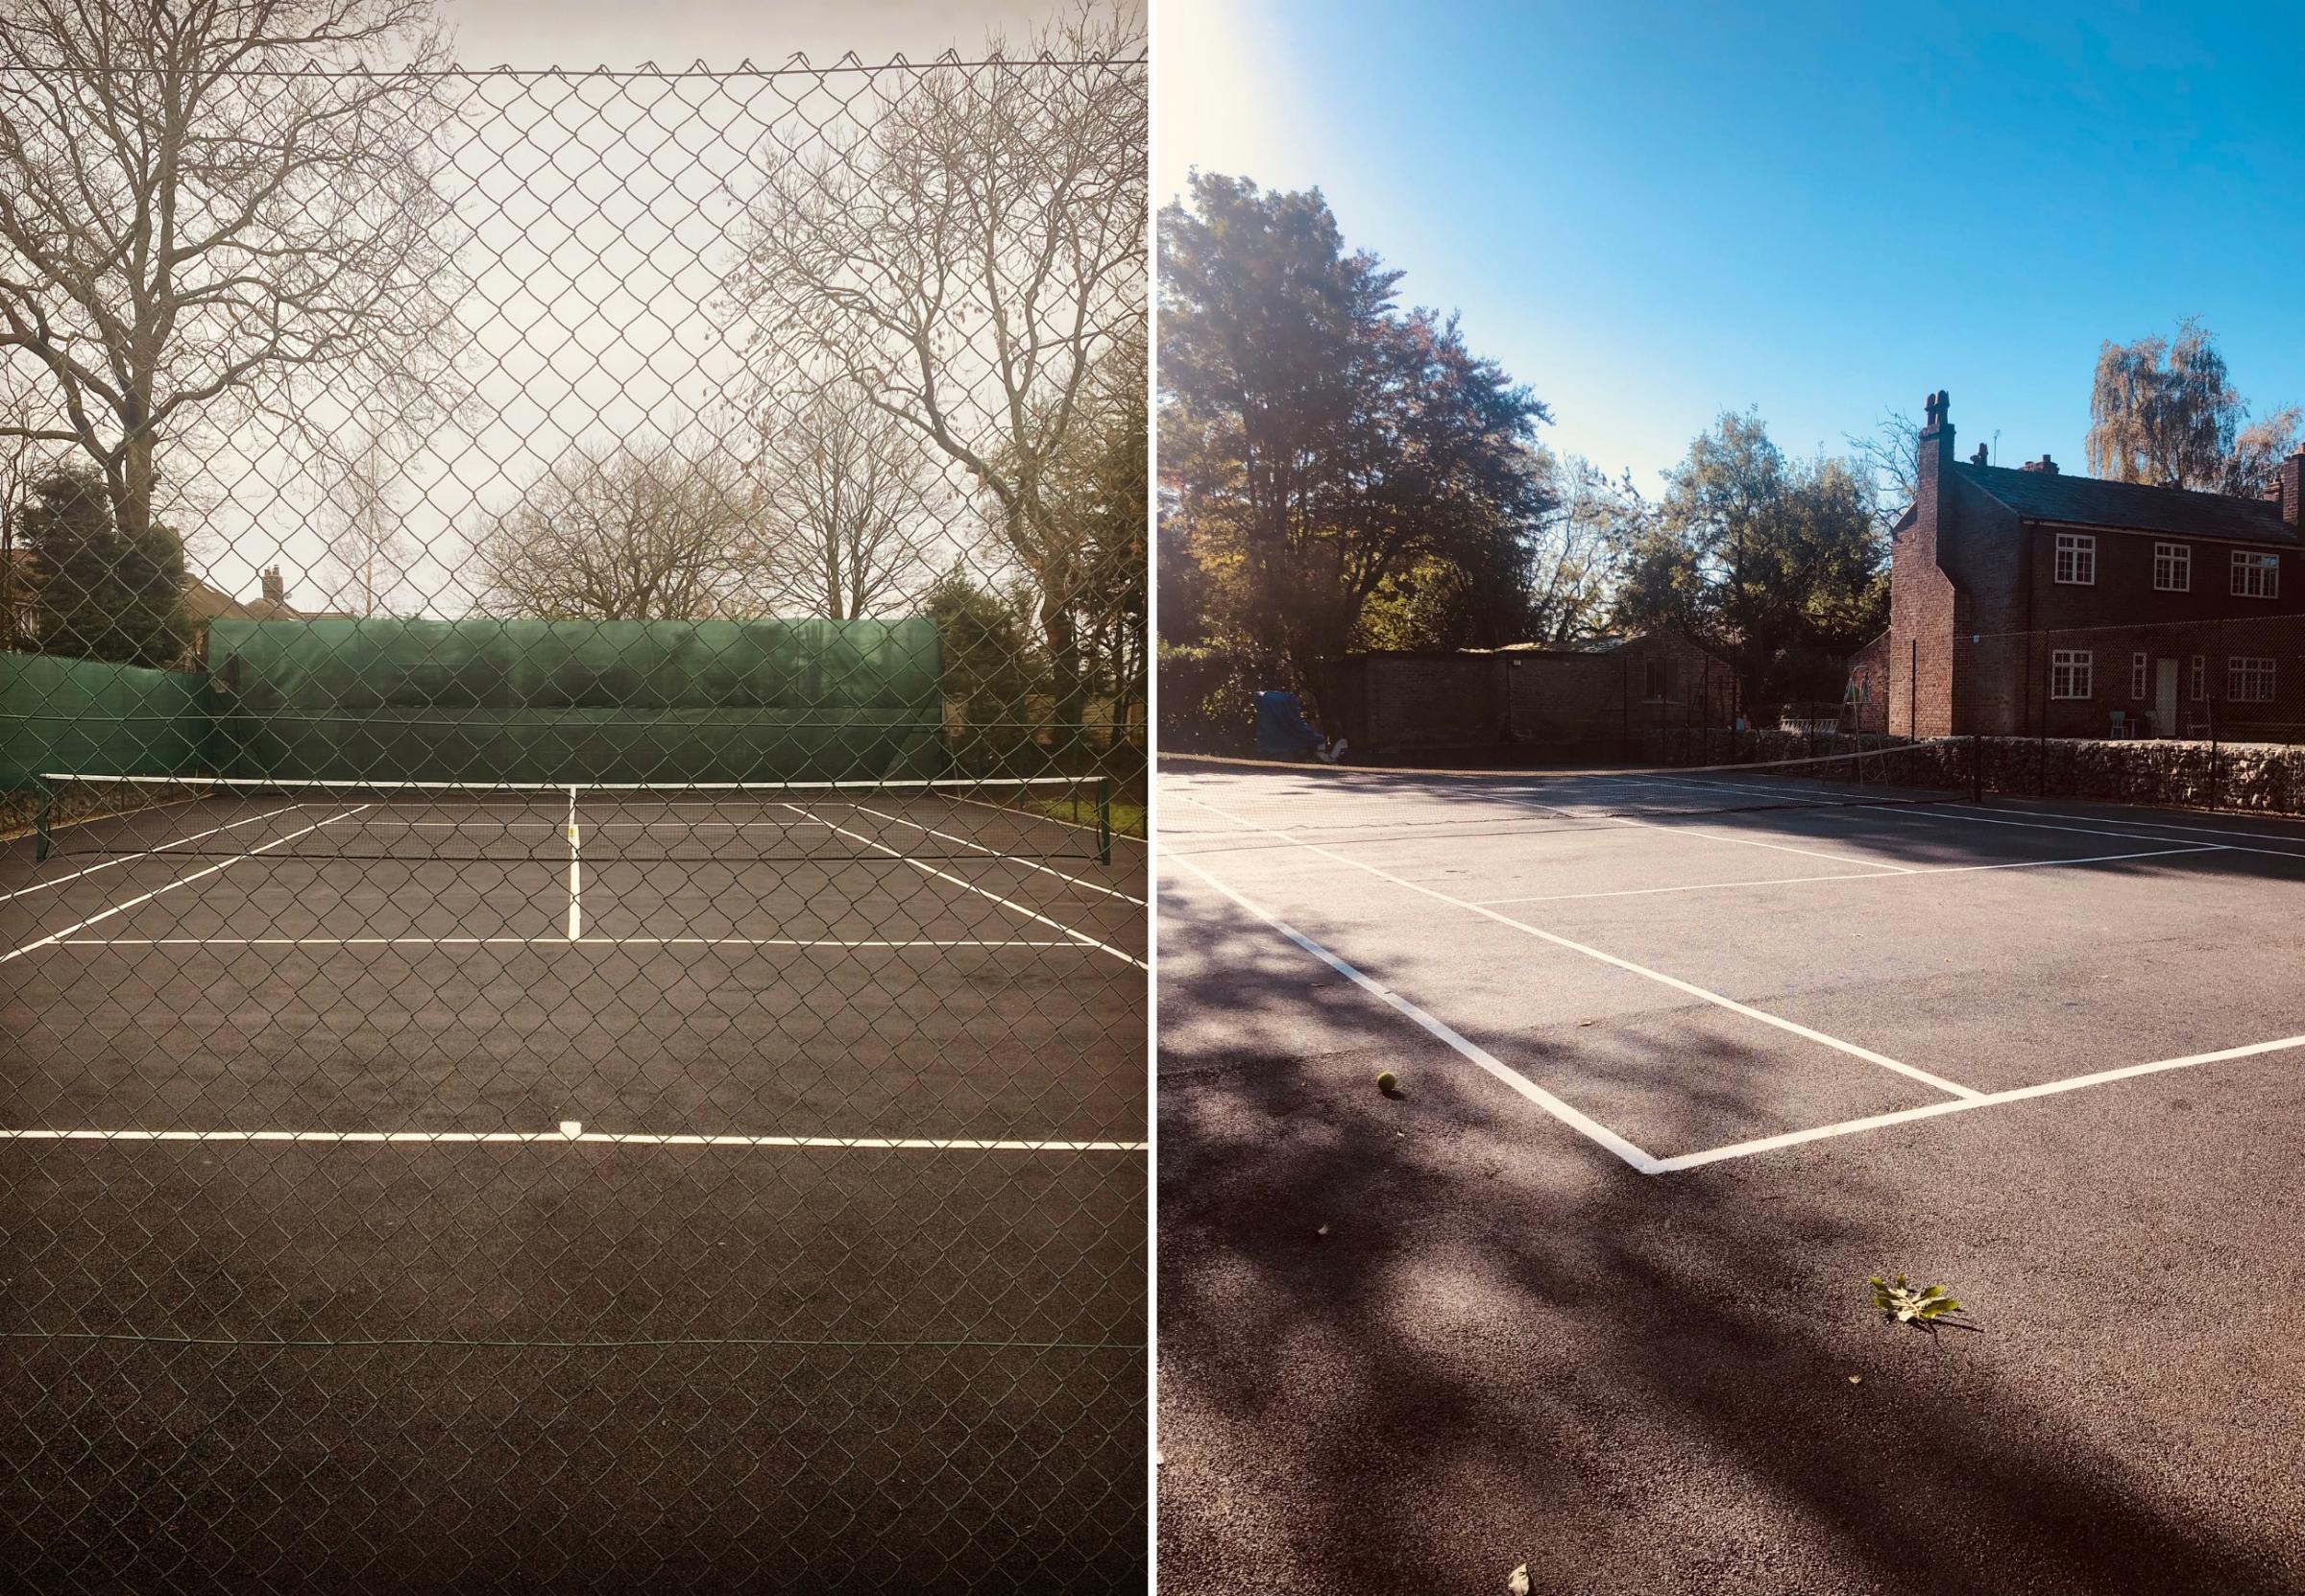 The before and after of the tennis court now open to the public for hire